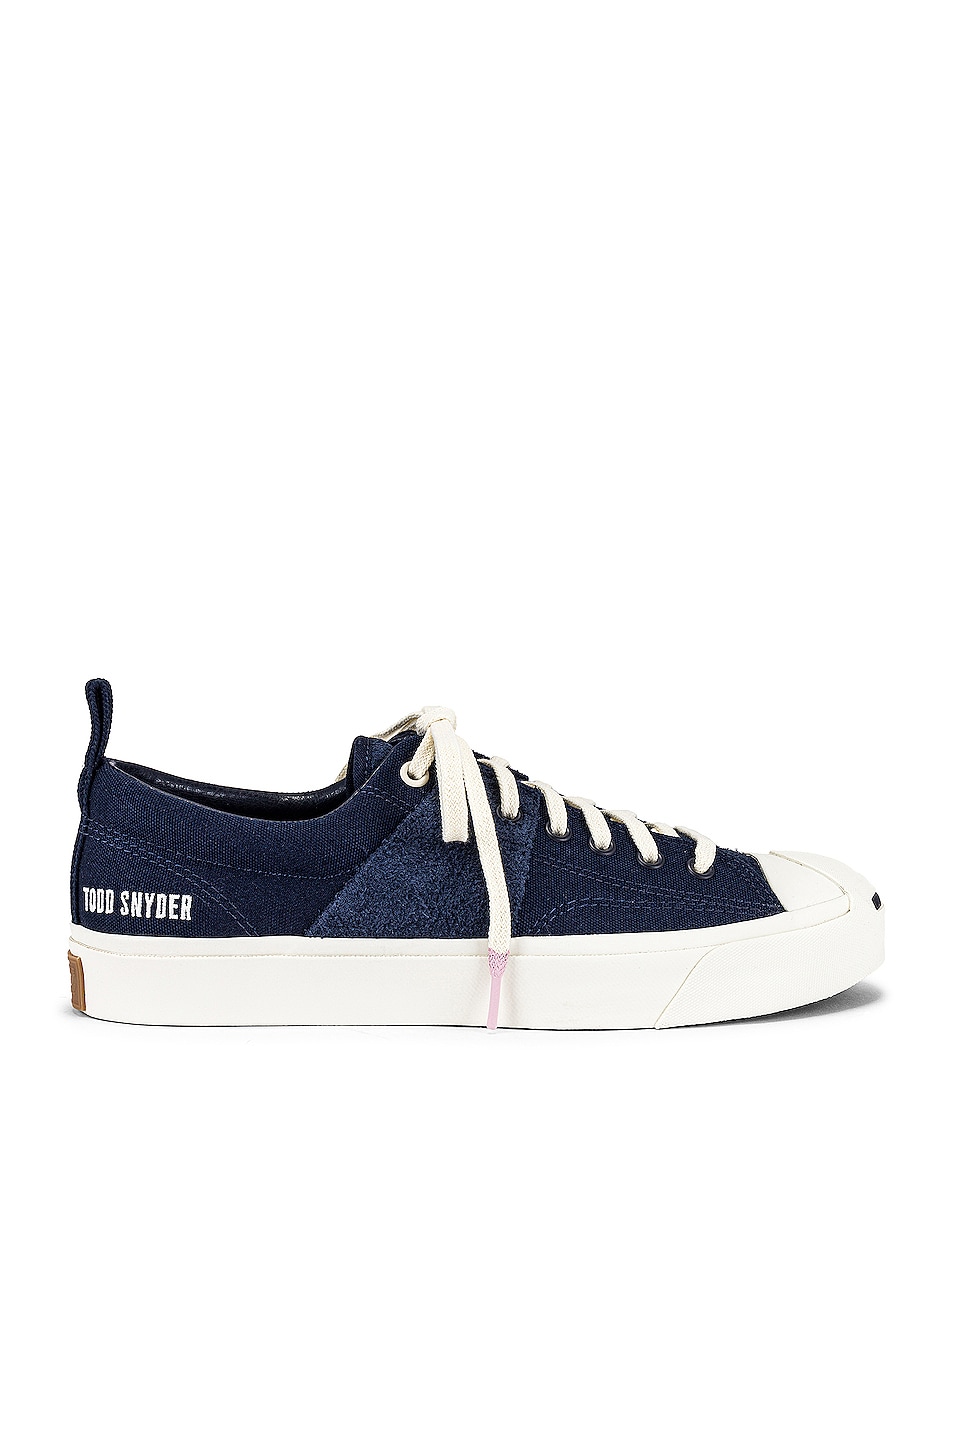 Image 1 of Converse Todd Snyder Jack Purcell in Obsidian